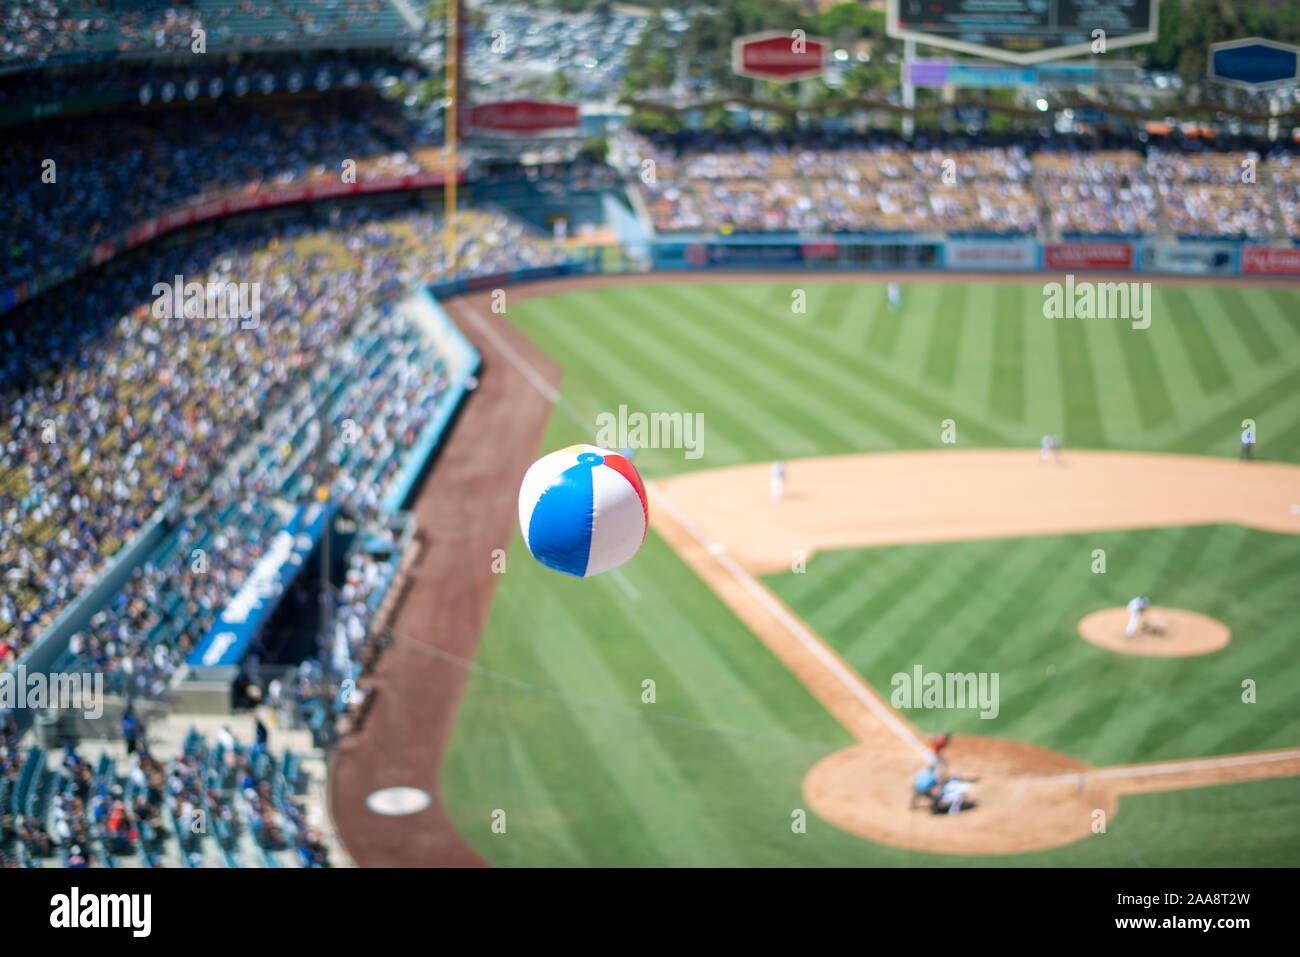 Beach ball floating above the field and stands of a baseball game Stock Photo